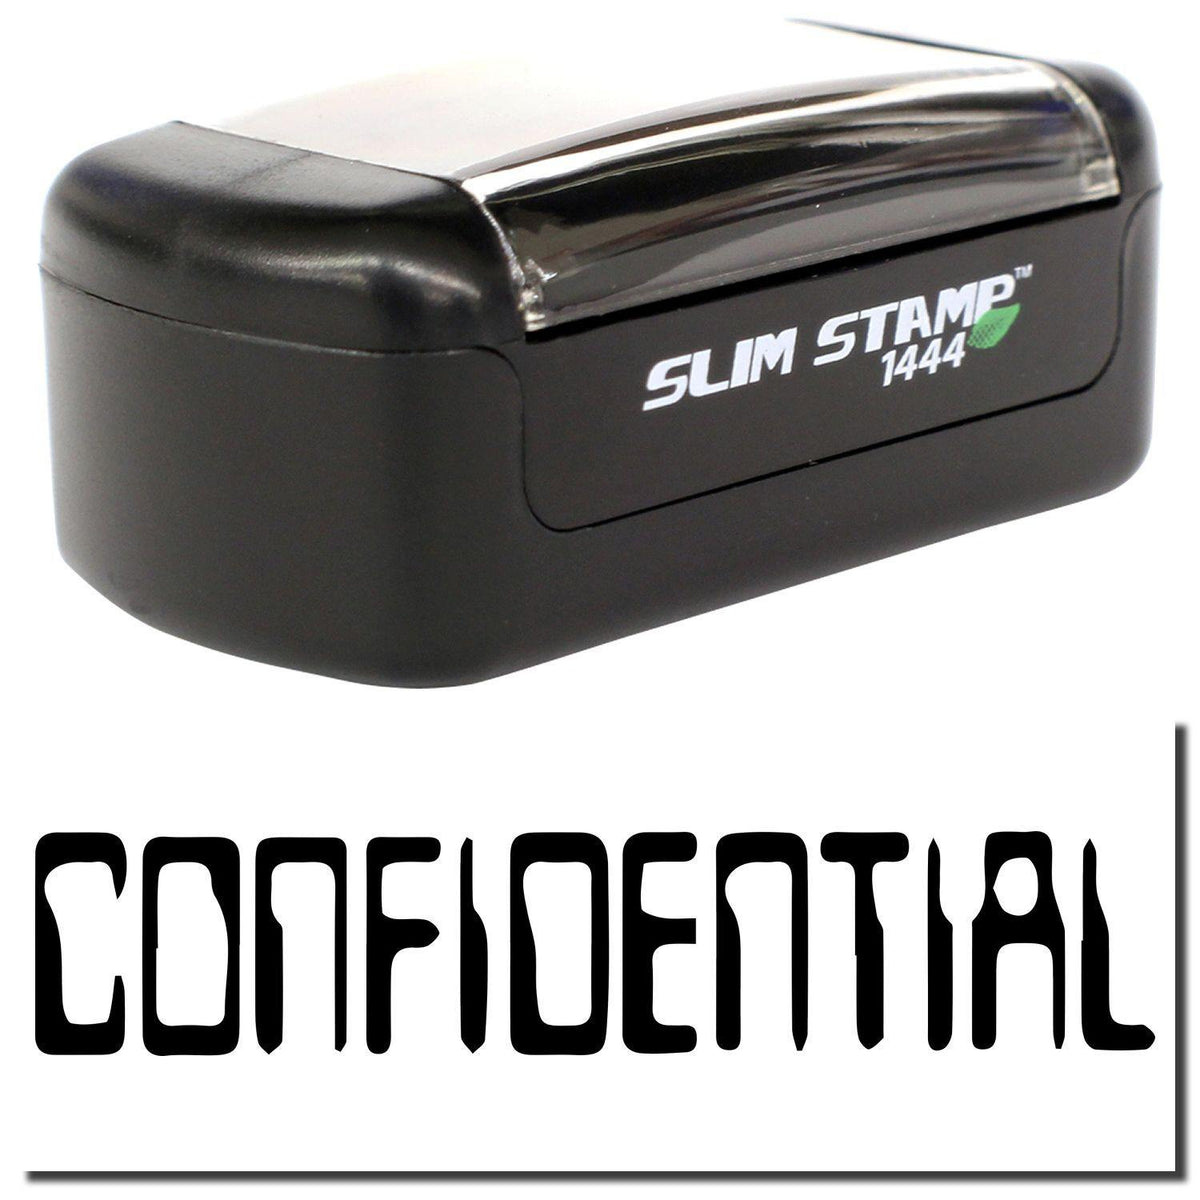 A stock office pre-inked stamp with a stamped image showing how the text &quot;CONFIDENTIAL&quot; in a barcode font is displayed after stamping.